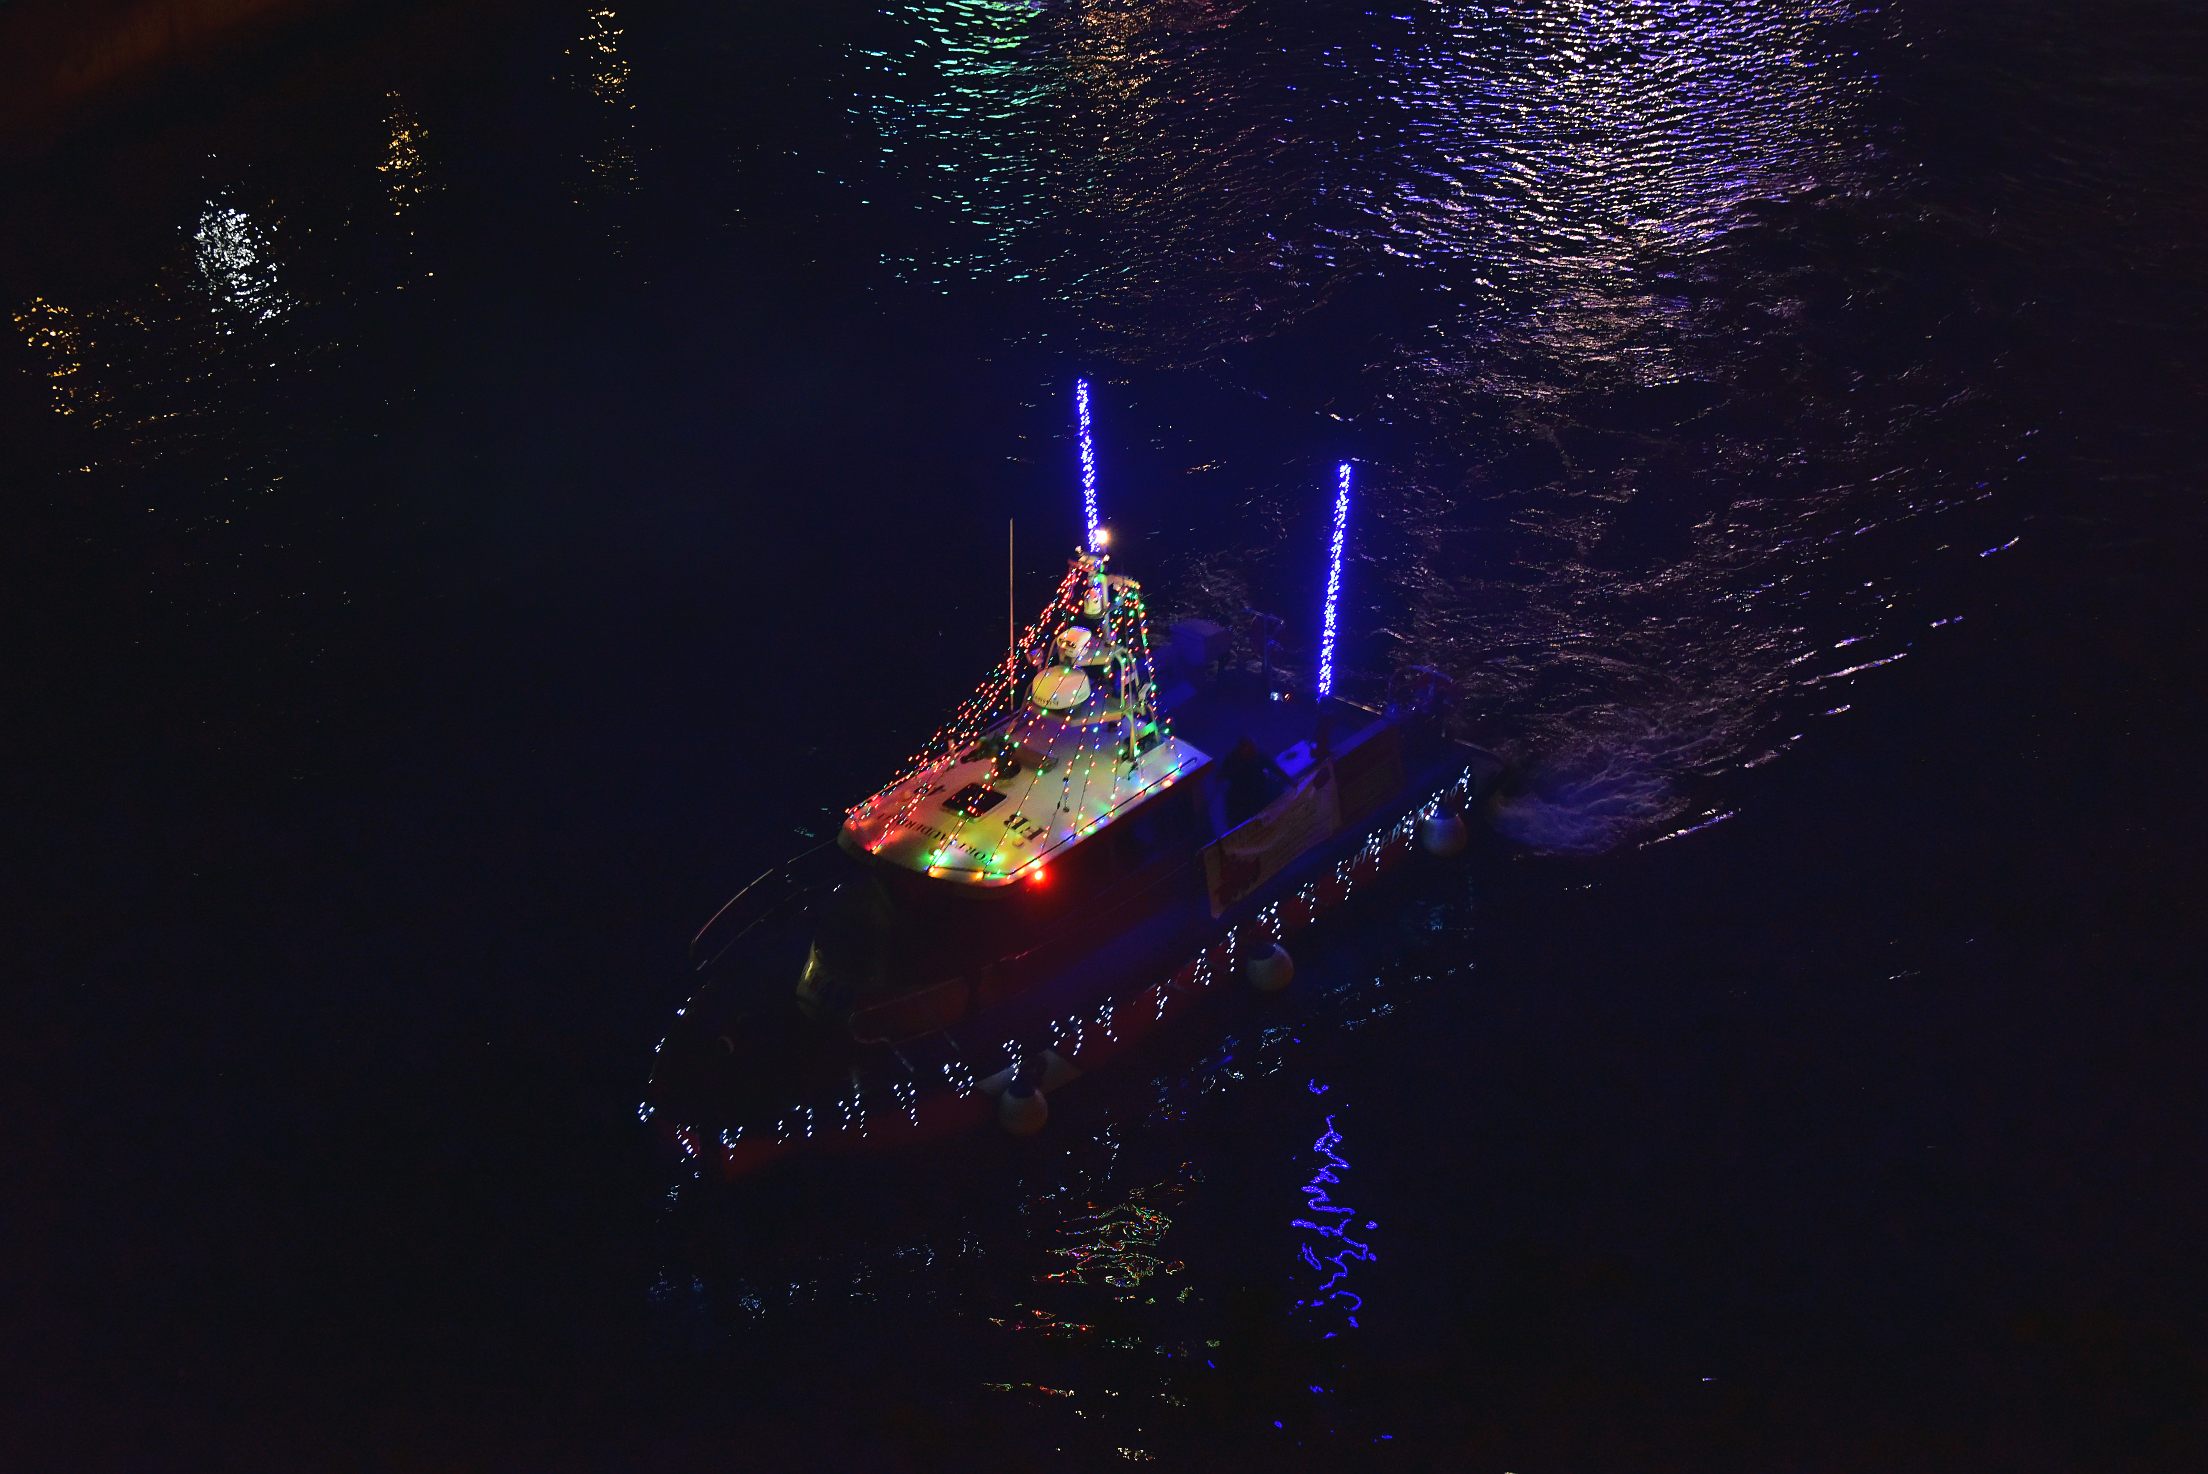 Fort Lauderdale Fire Boat 49, boat number 3 in the 2021 Winterfest Boat Parade